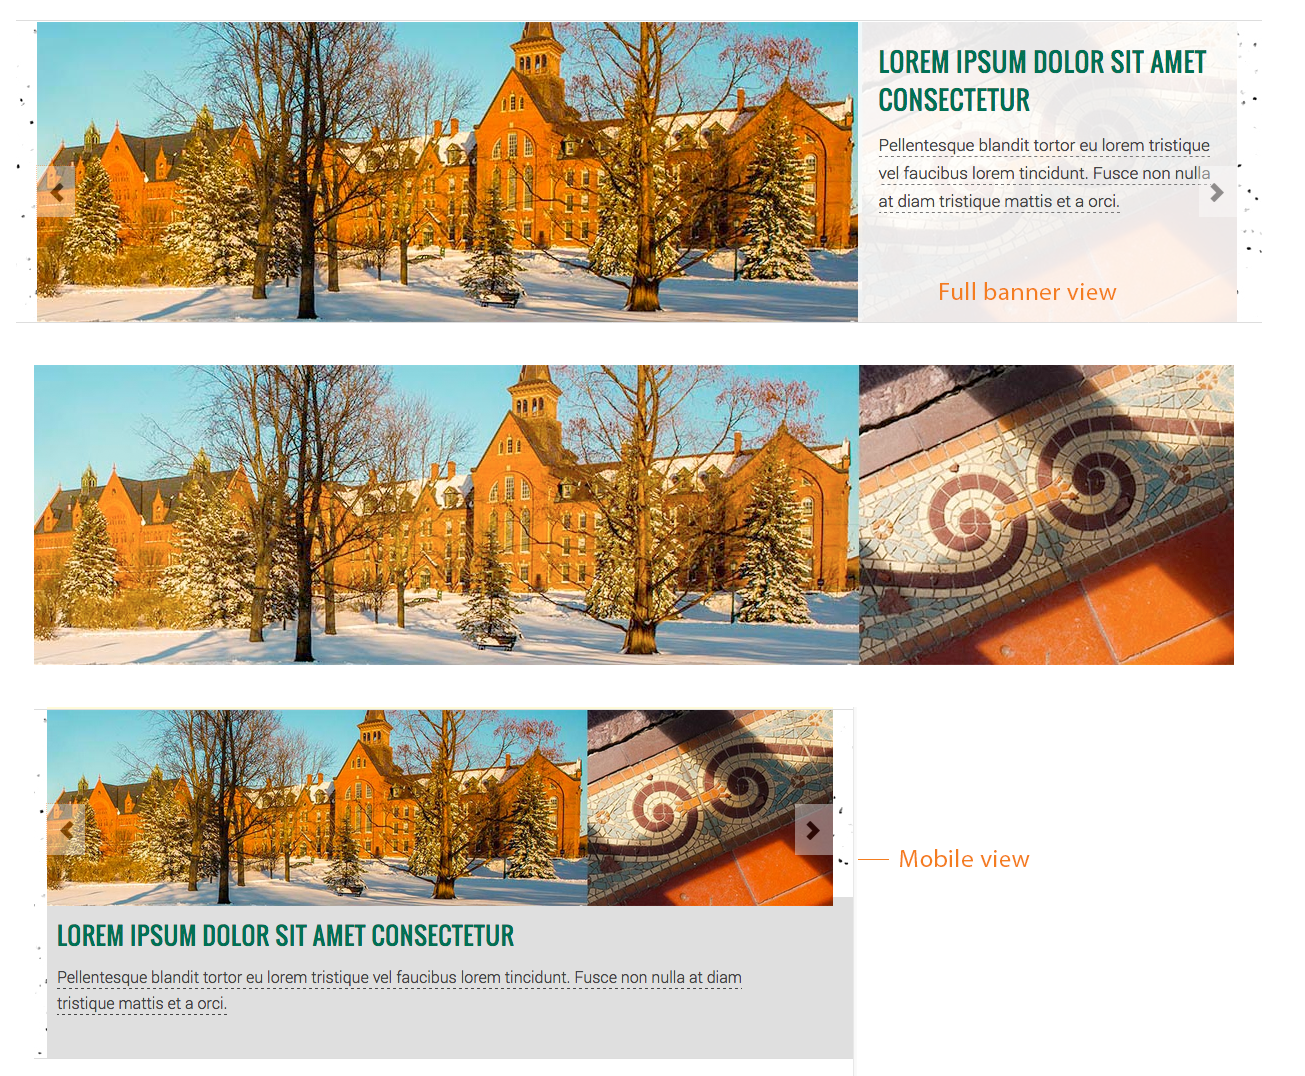 Example of a home page banner composed of 2 images that makes good use of an architectural texture under the caption area.